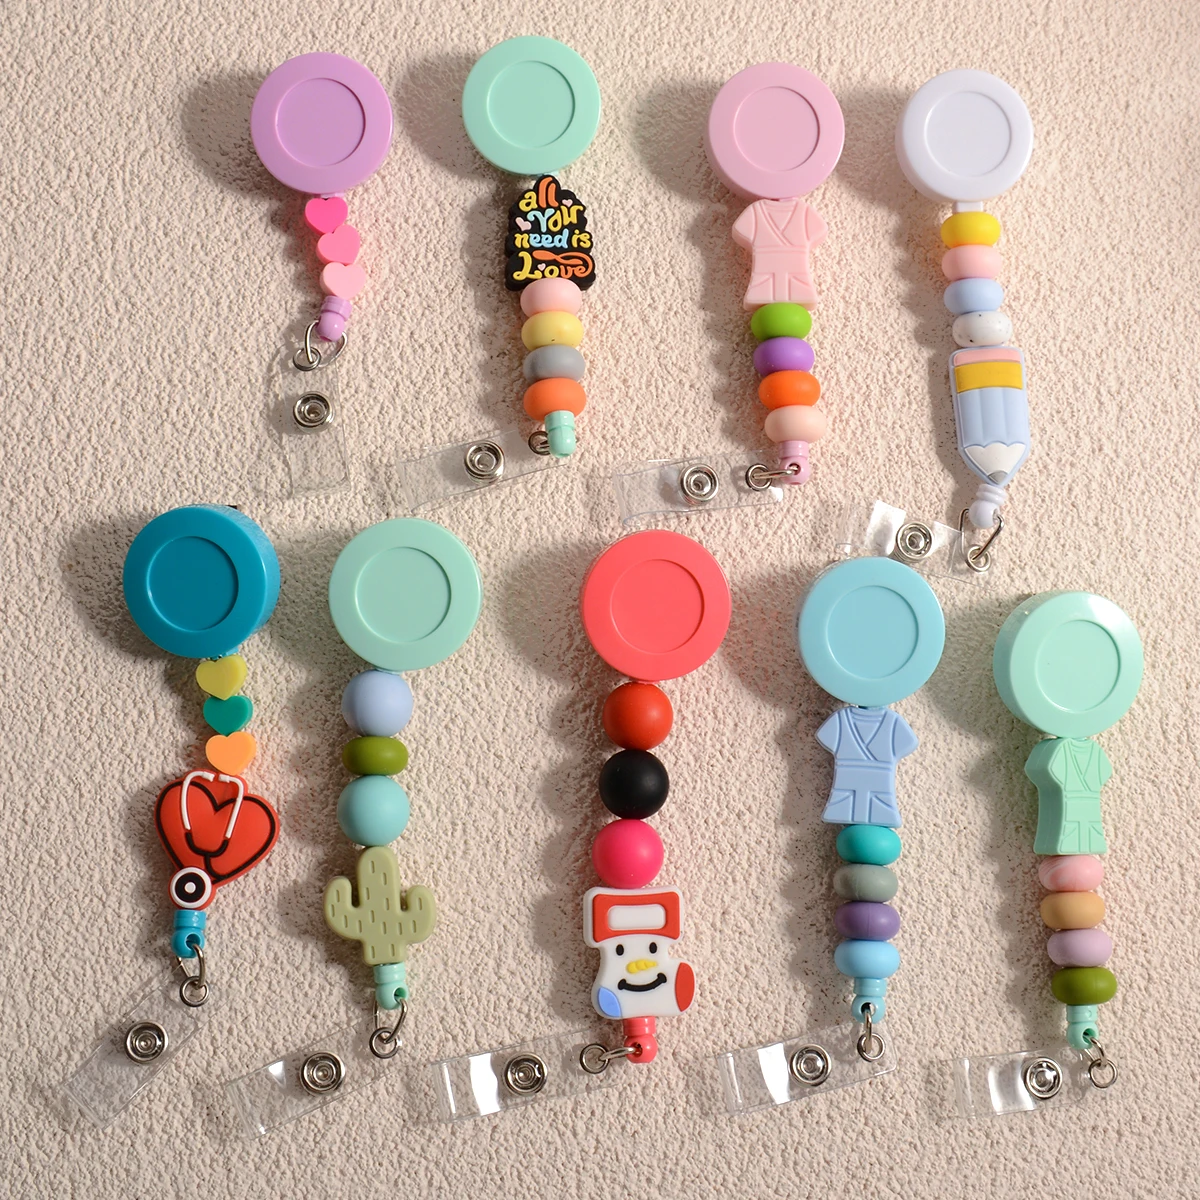 Retractable Silicone Beads Badge Reels BBS Cute Heart Nurse Id Badge Holders with Alligator CliP for Nursing Teachers Office